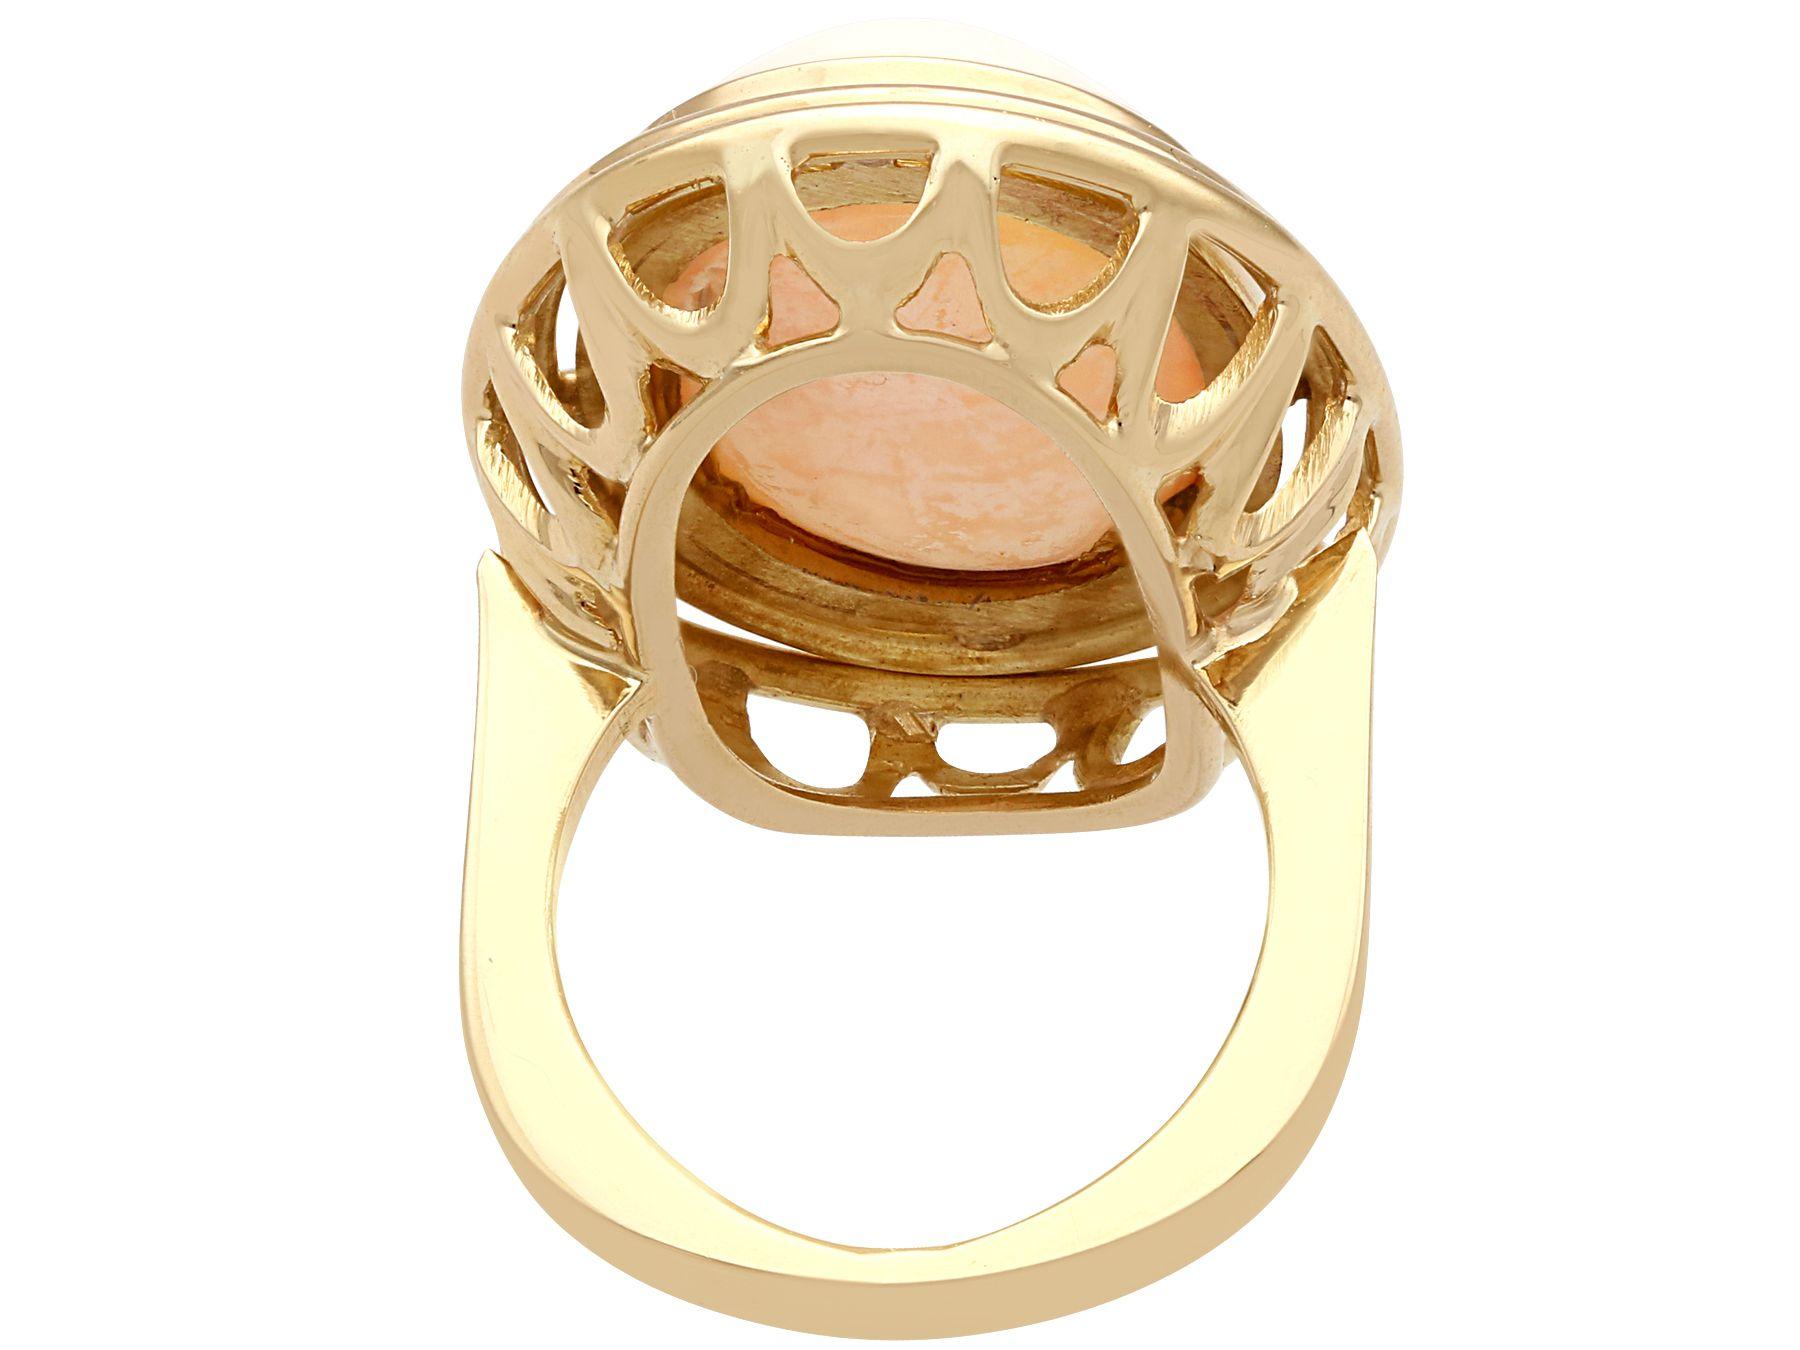 1960s 13.98 Carat Cabochon Cut Coral and Yellow Gold Cocktail Ring In Excellent Condition For Sale In Jesmond, Newcastle Upon Tyne